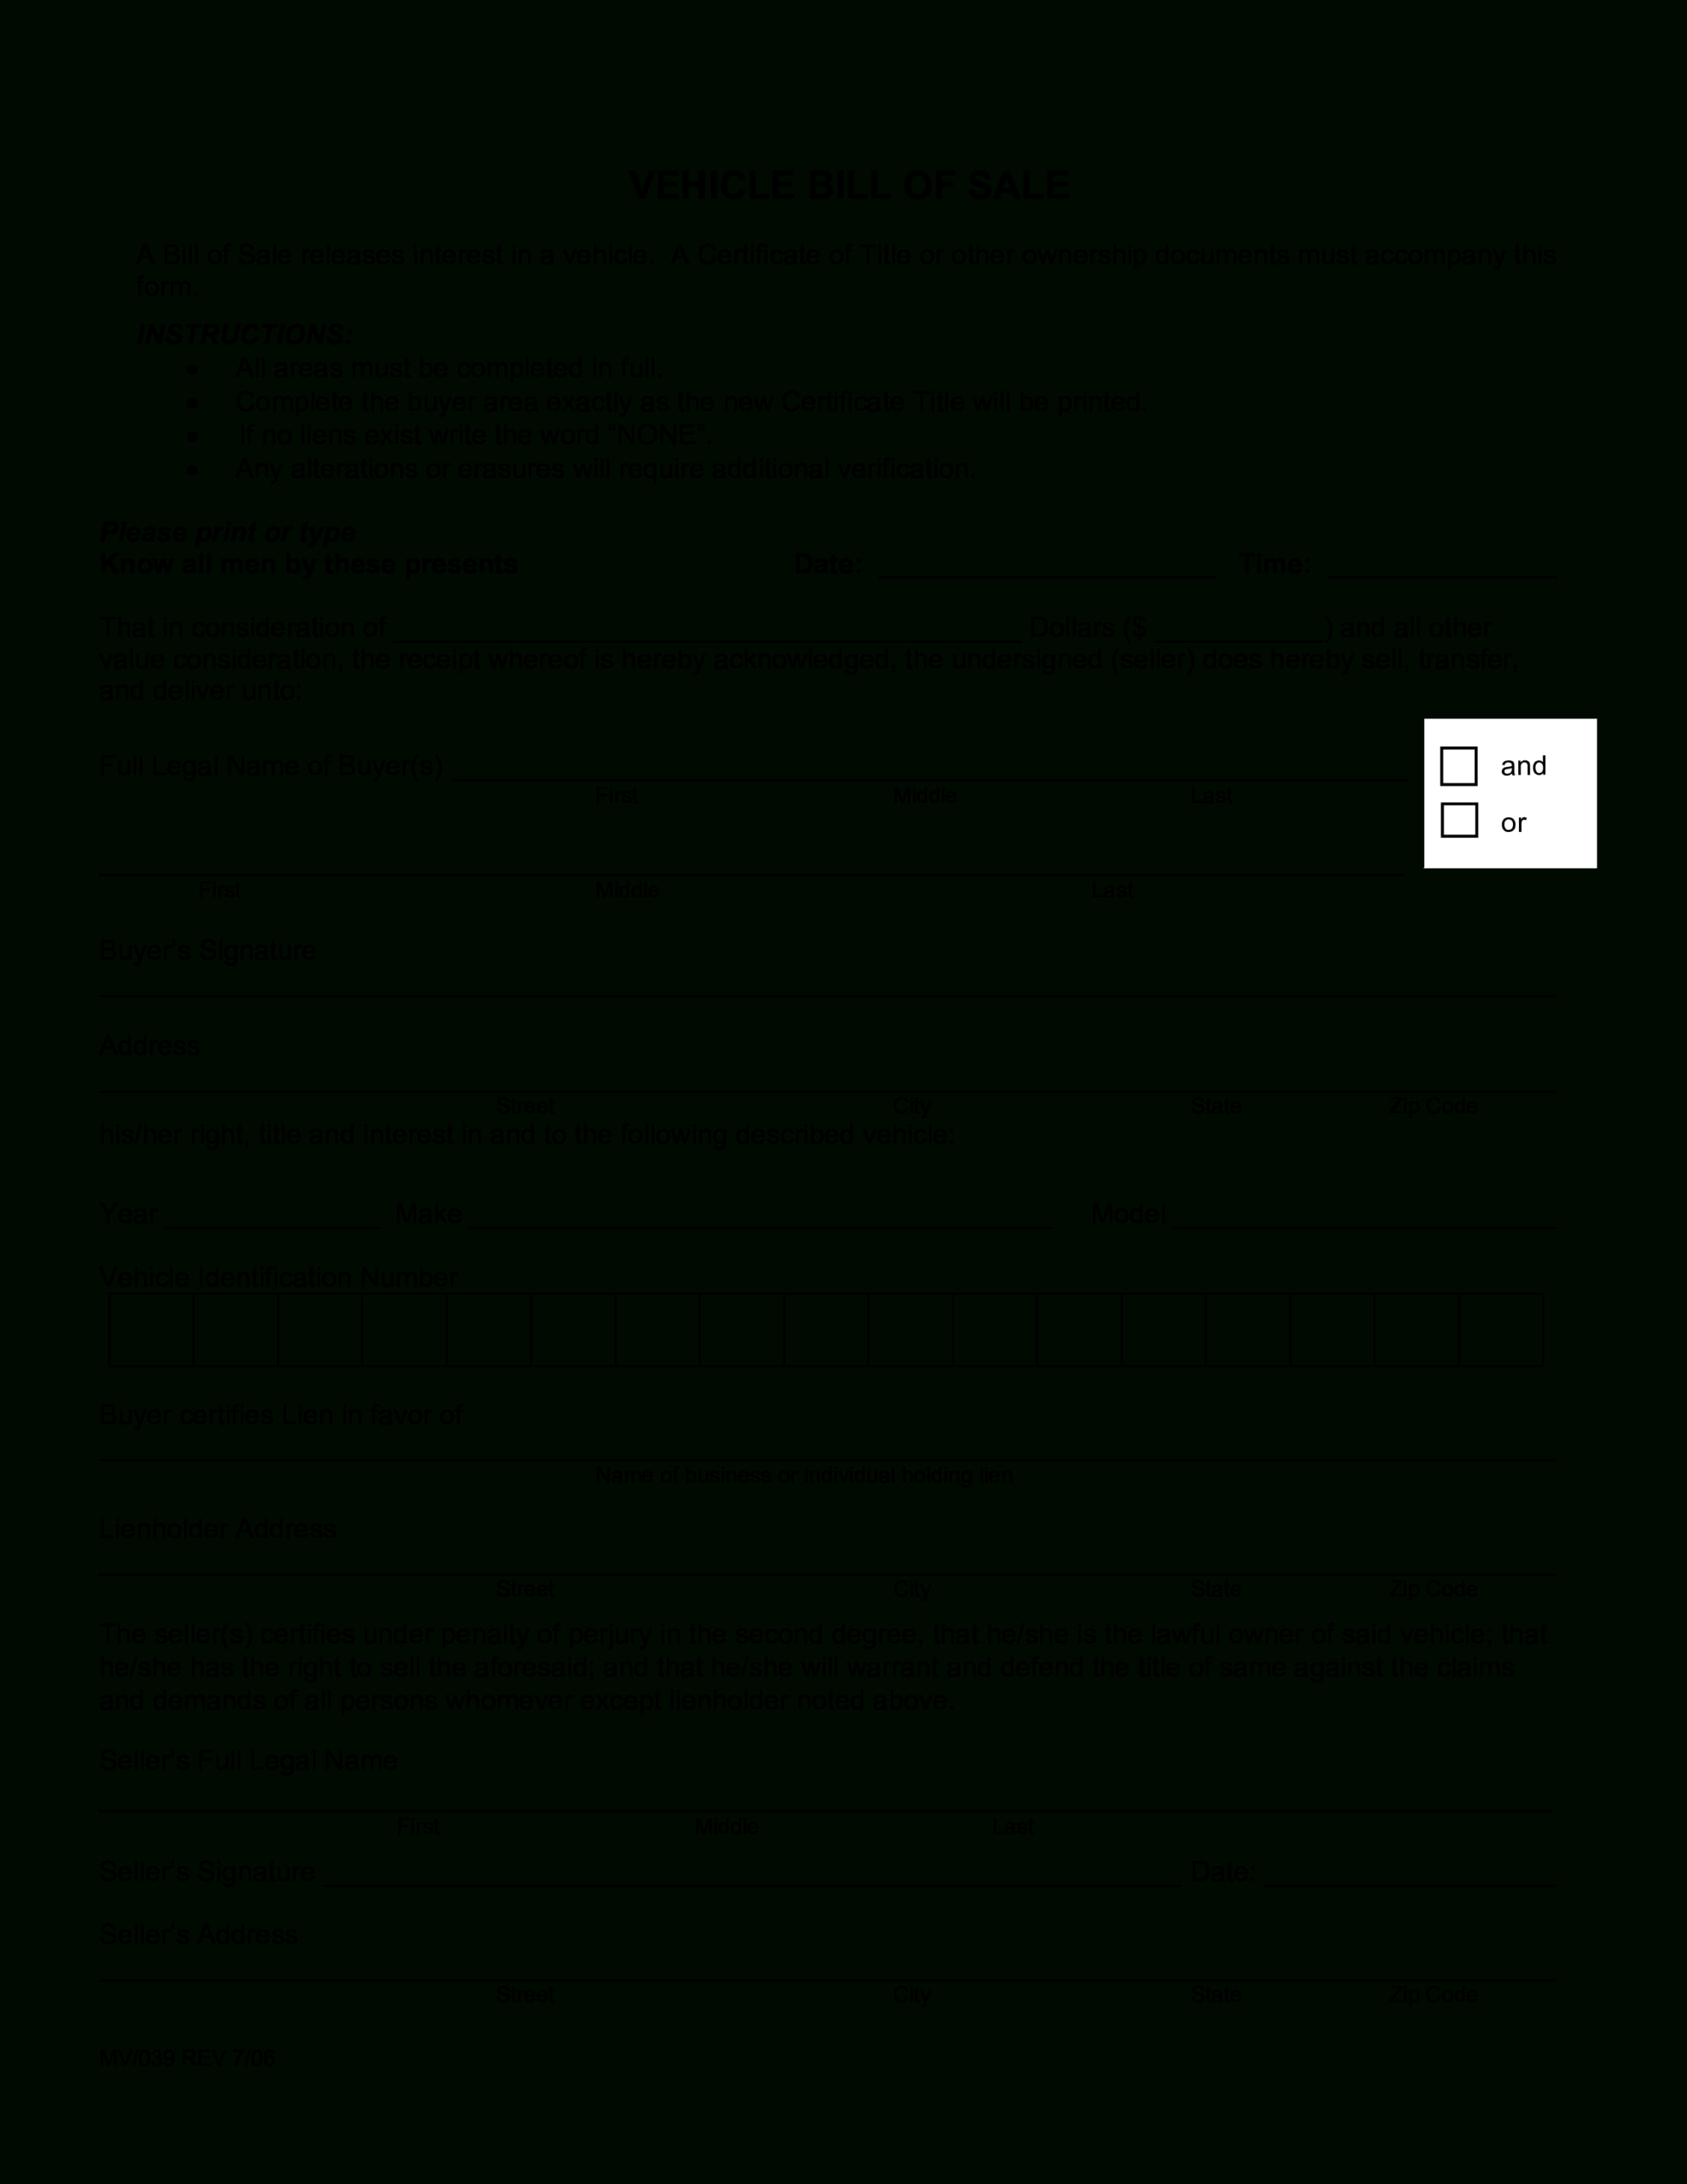 Legal Blank Bill Of Sale | Templates At Allbusinesstemplates Within Blank Legal Document Template